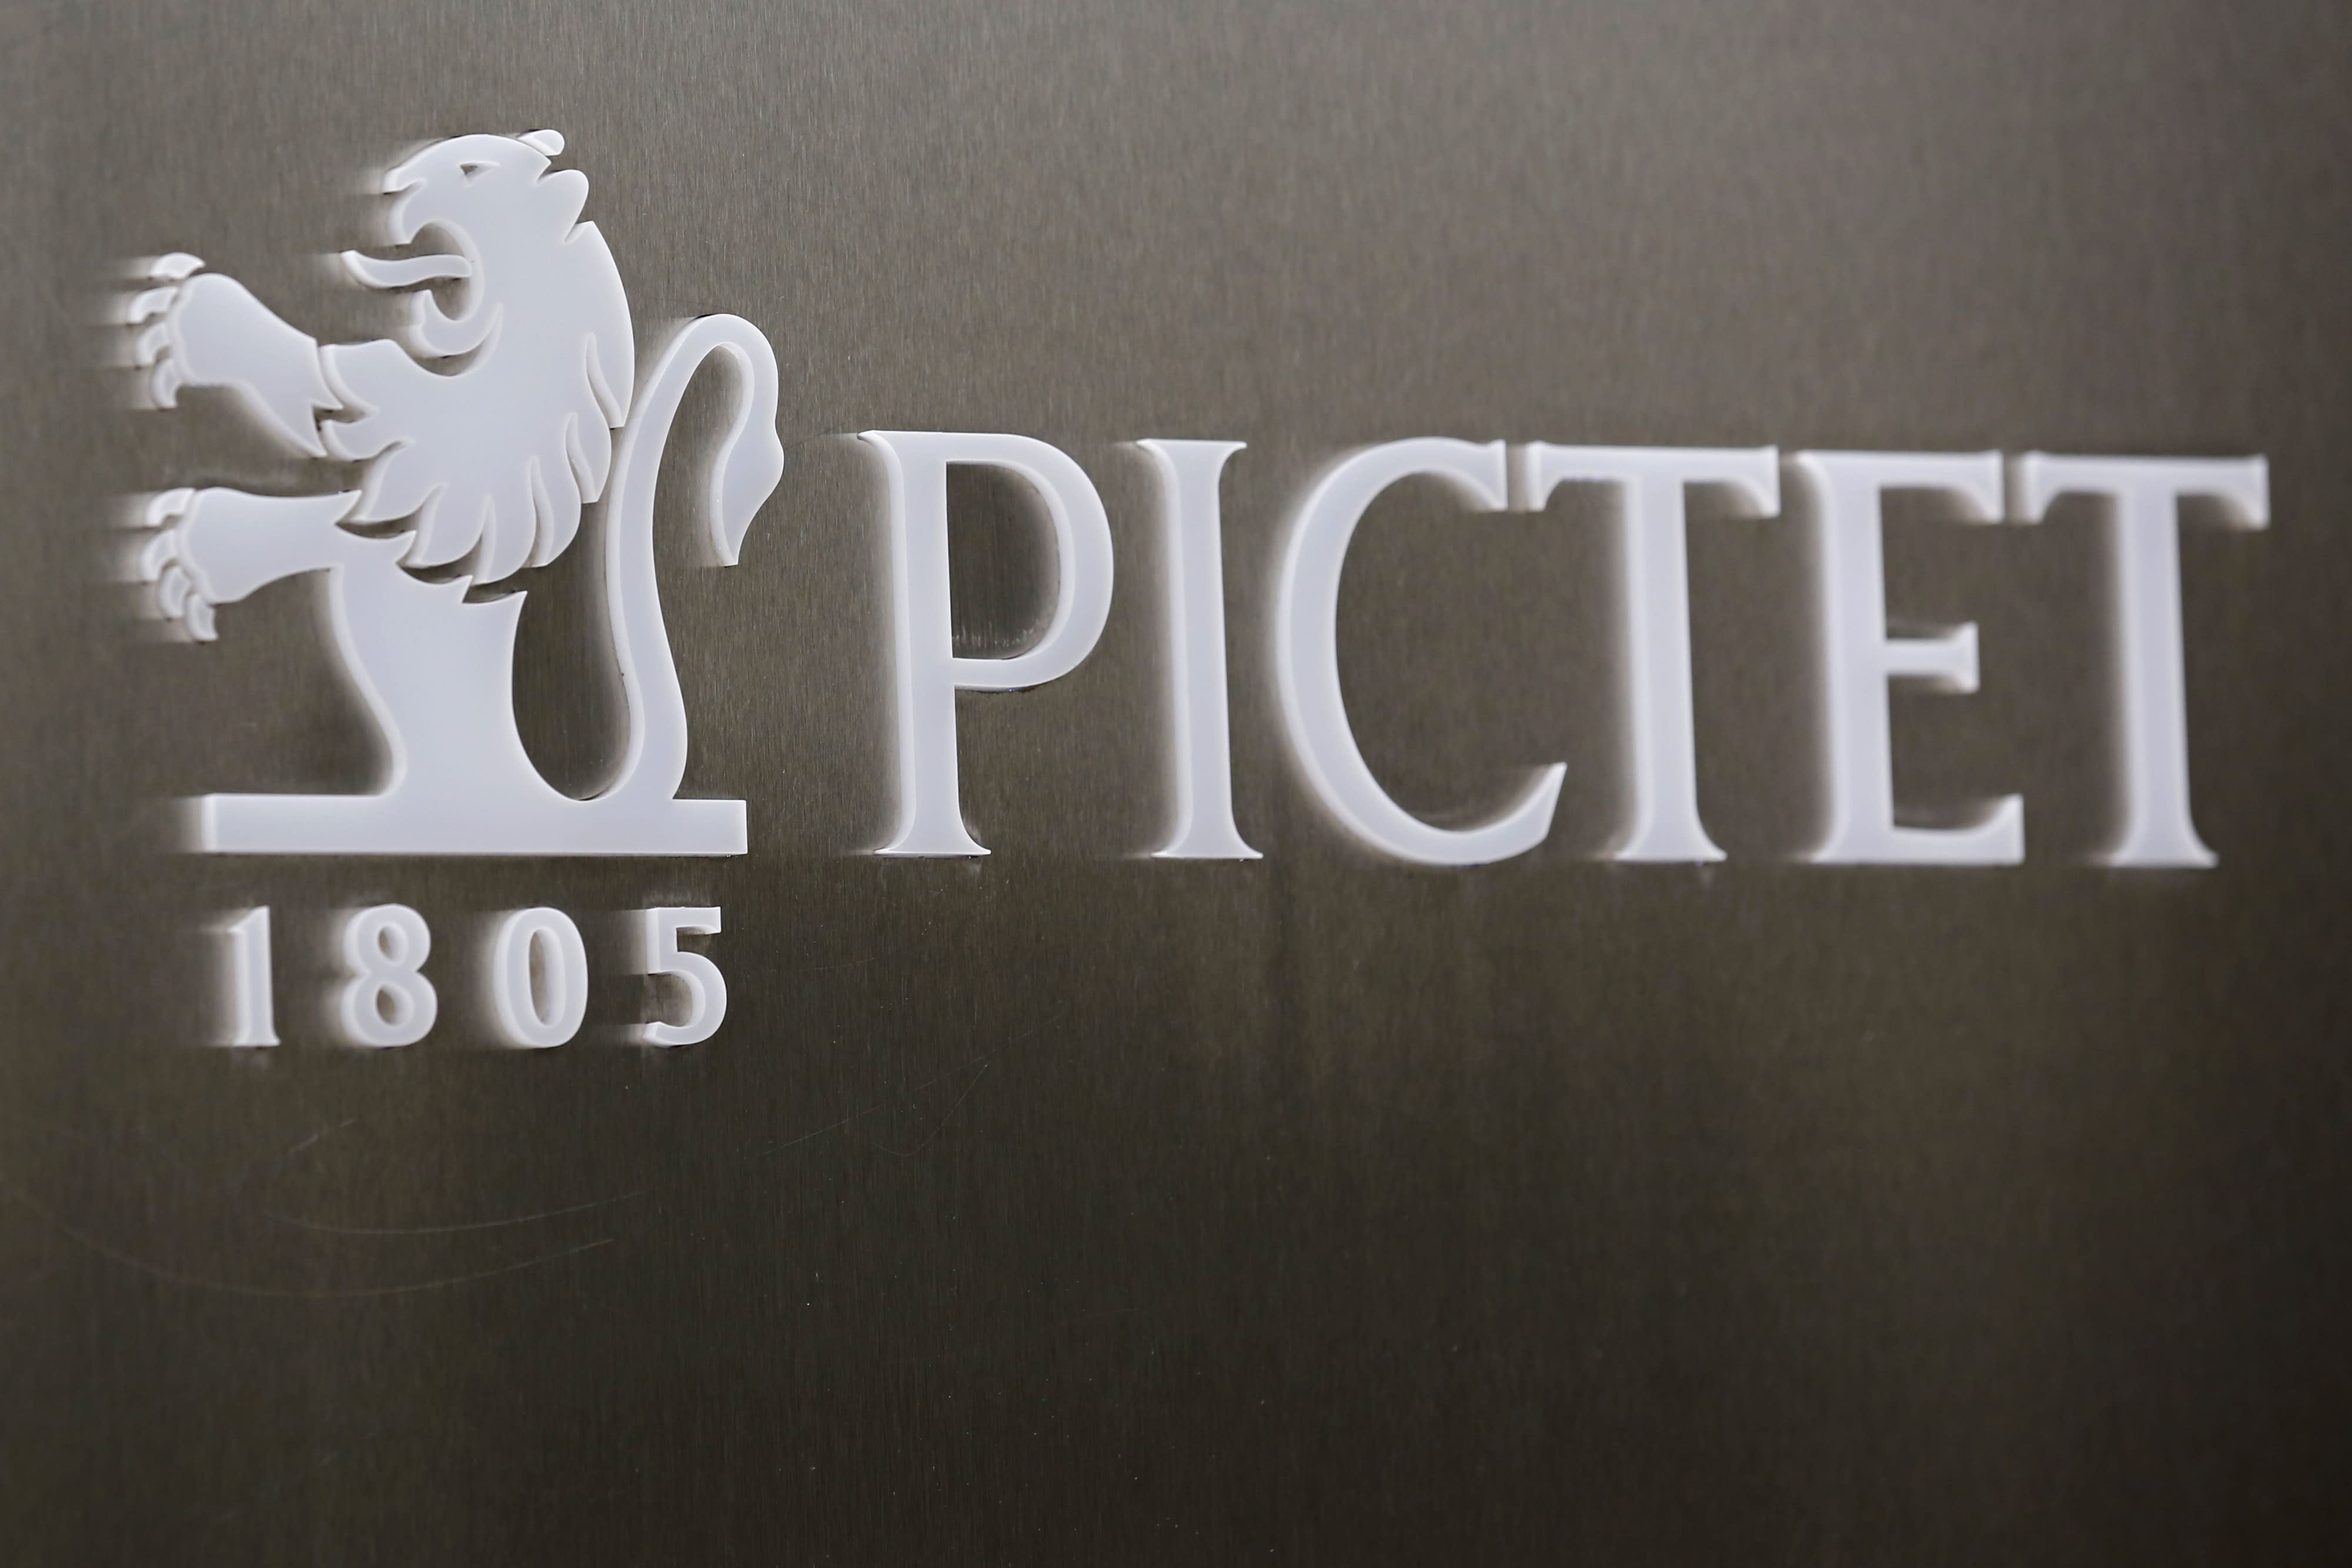 Swiss Bank Banque Pictet Agrees to Pay $122.9 Million for Hiding over $5.6 Billion from IRS